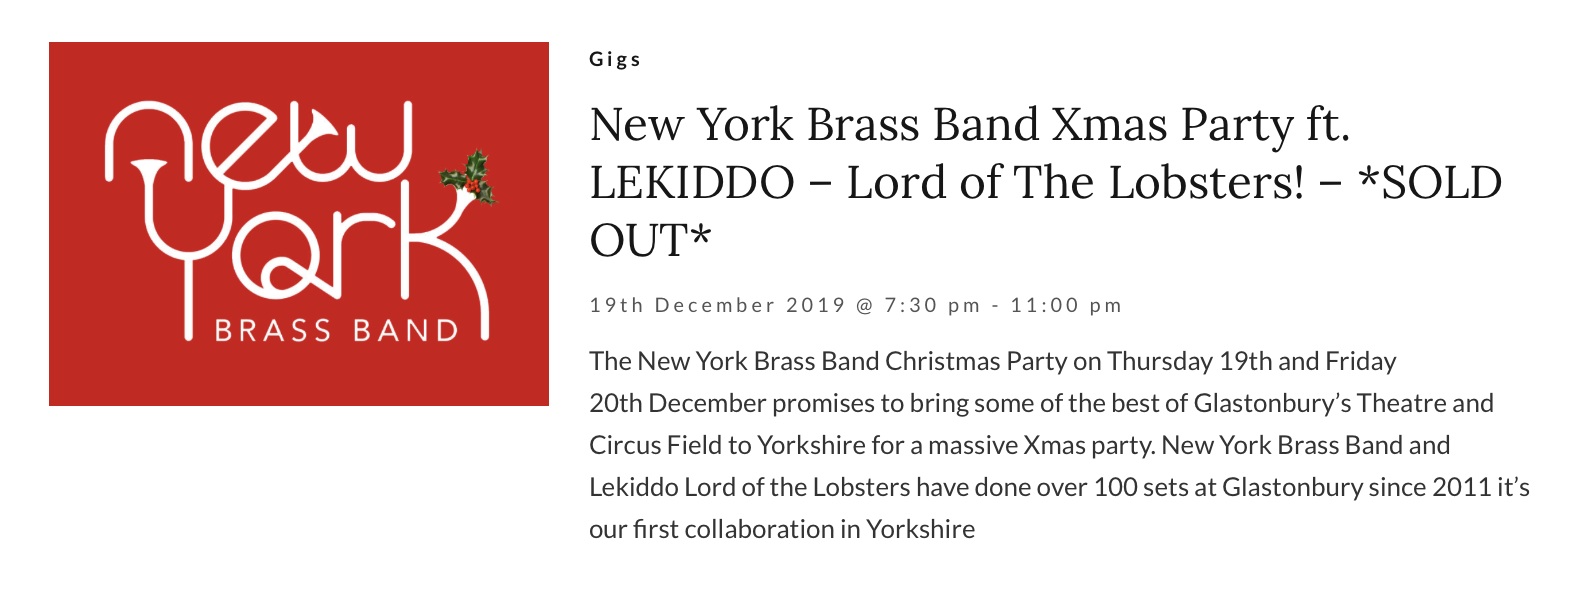 New York Brass Band Xmas Party ft. LEKIDDO – Lord of The Lobsters! – *SOLD OUT*